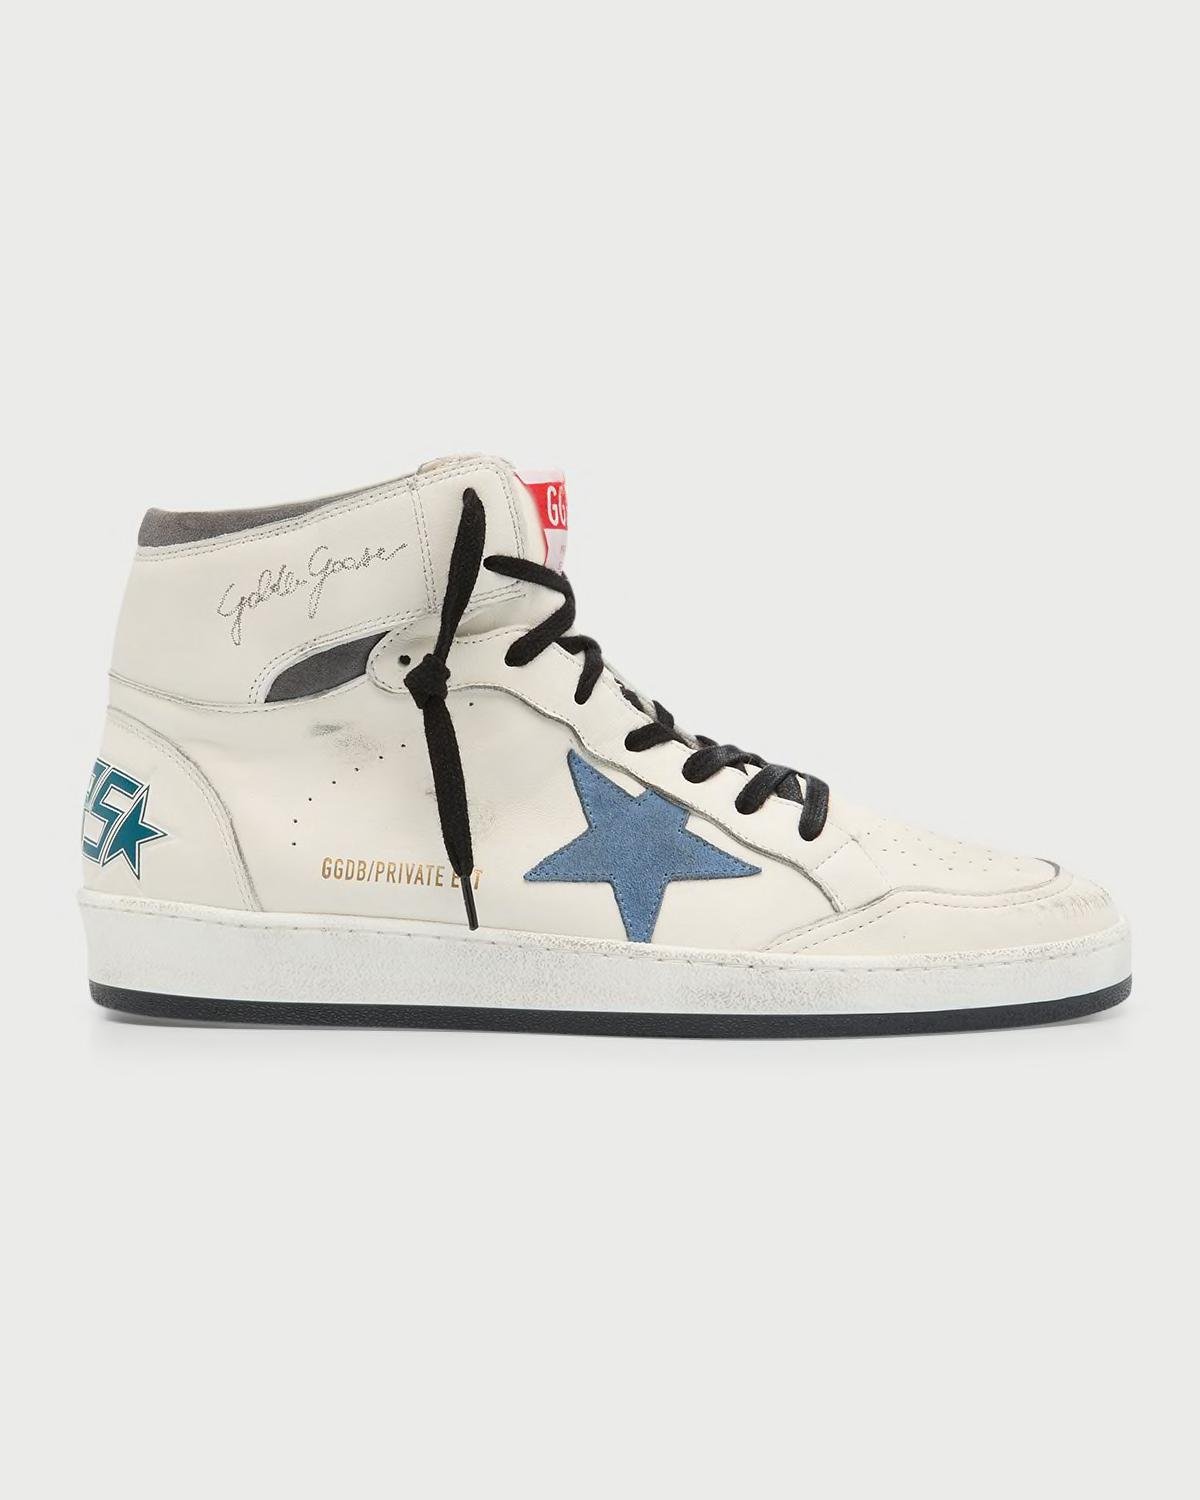 Men's Sky-Star Leather High Top Sneakers by GOLDEN GOOSE